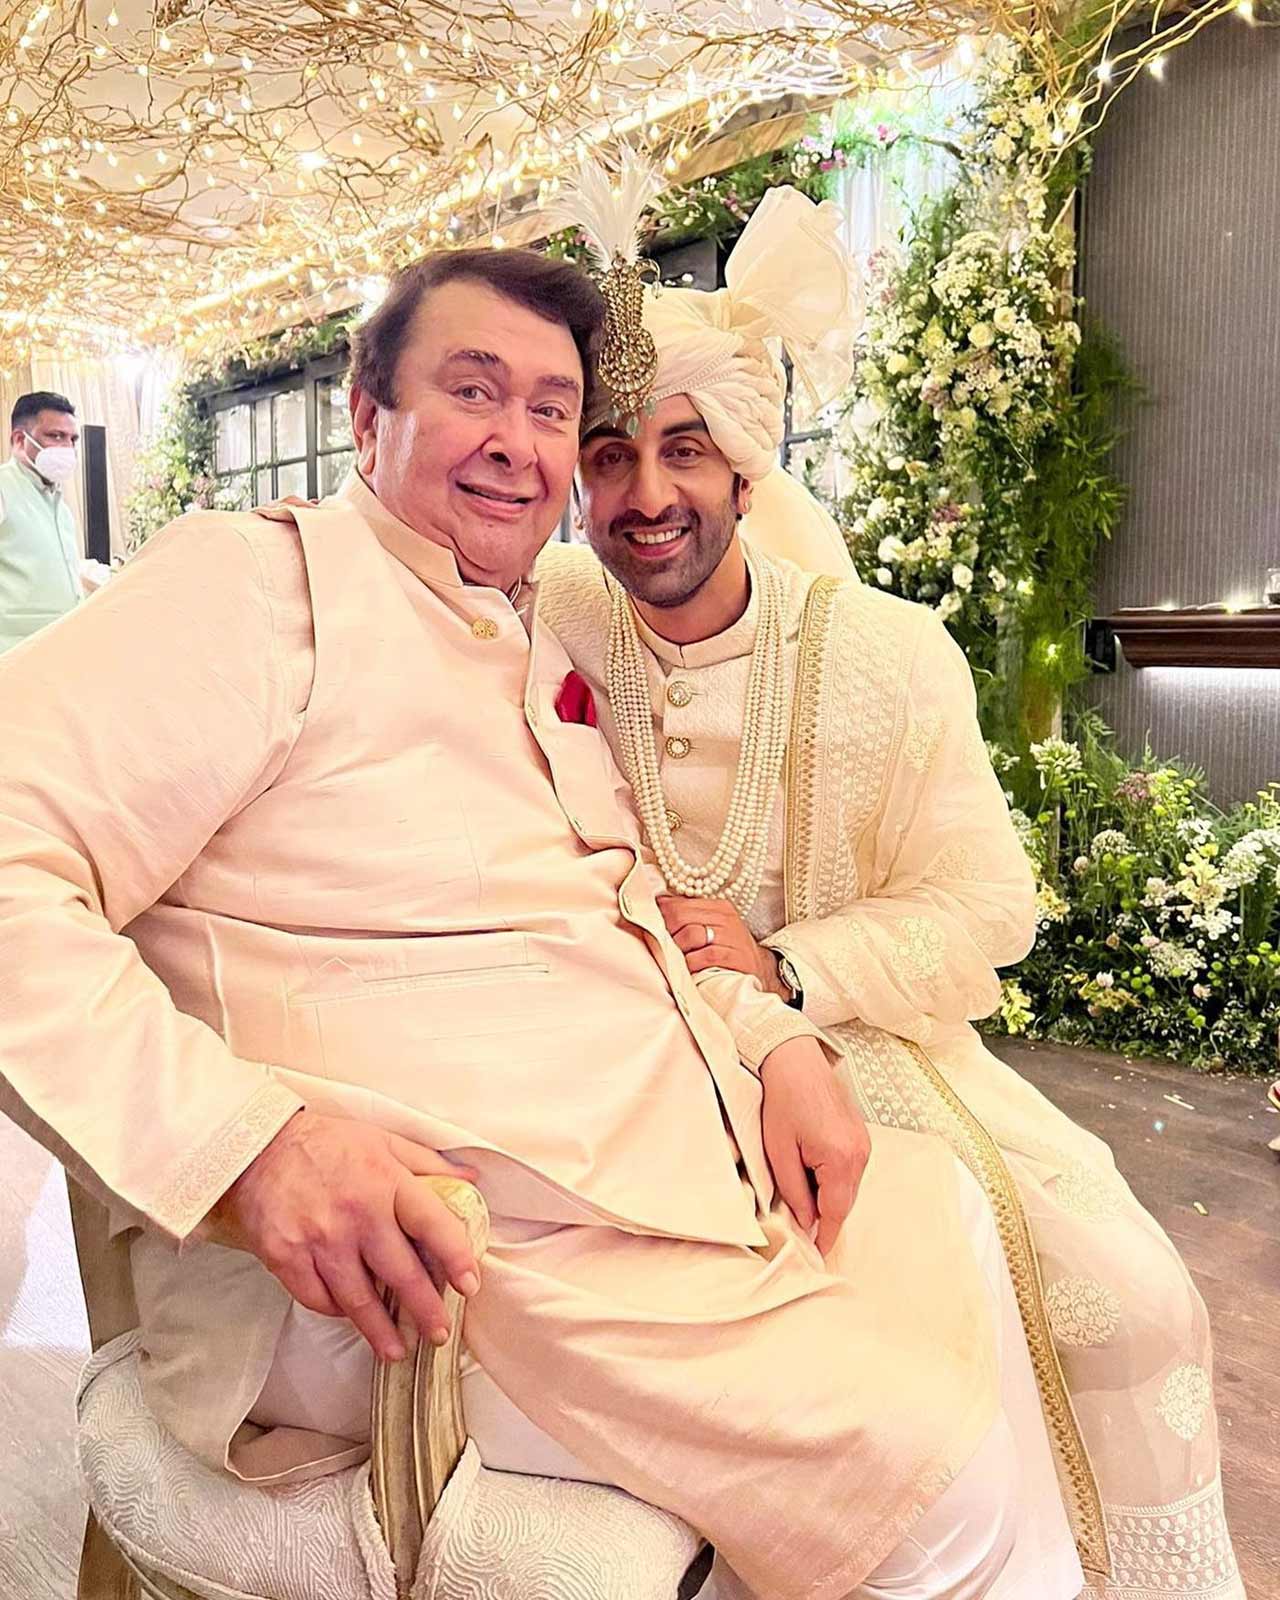 The pre-wedding festivities including a special pooja and mehendi ceremony were conducted on Wednesday. Several guests including Ranbir's mother Neetu Kapoor, sister Riddhima Kapoor Sahni, cousins Kareena Kapoor Khan, Karisma Kapoor, and aunt Reema Kapoor were dressed to the nines for the event.
In picture: Ranbir Kapoor with Karisma Kapoor and Kareena Kapoor's father Randhir Kapoor